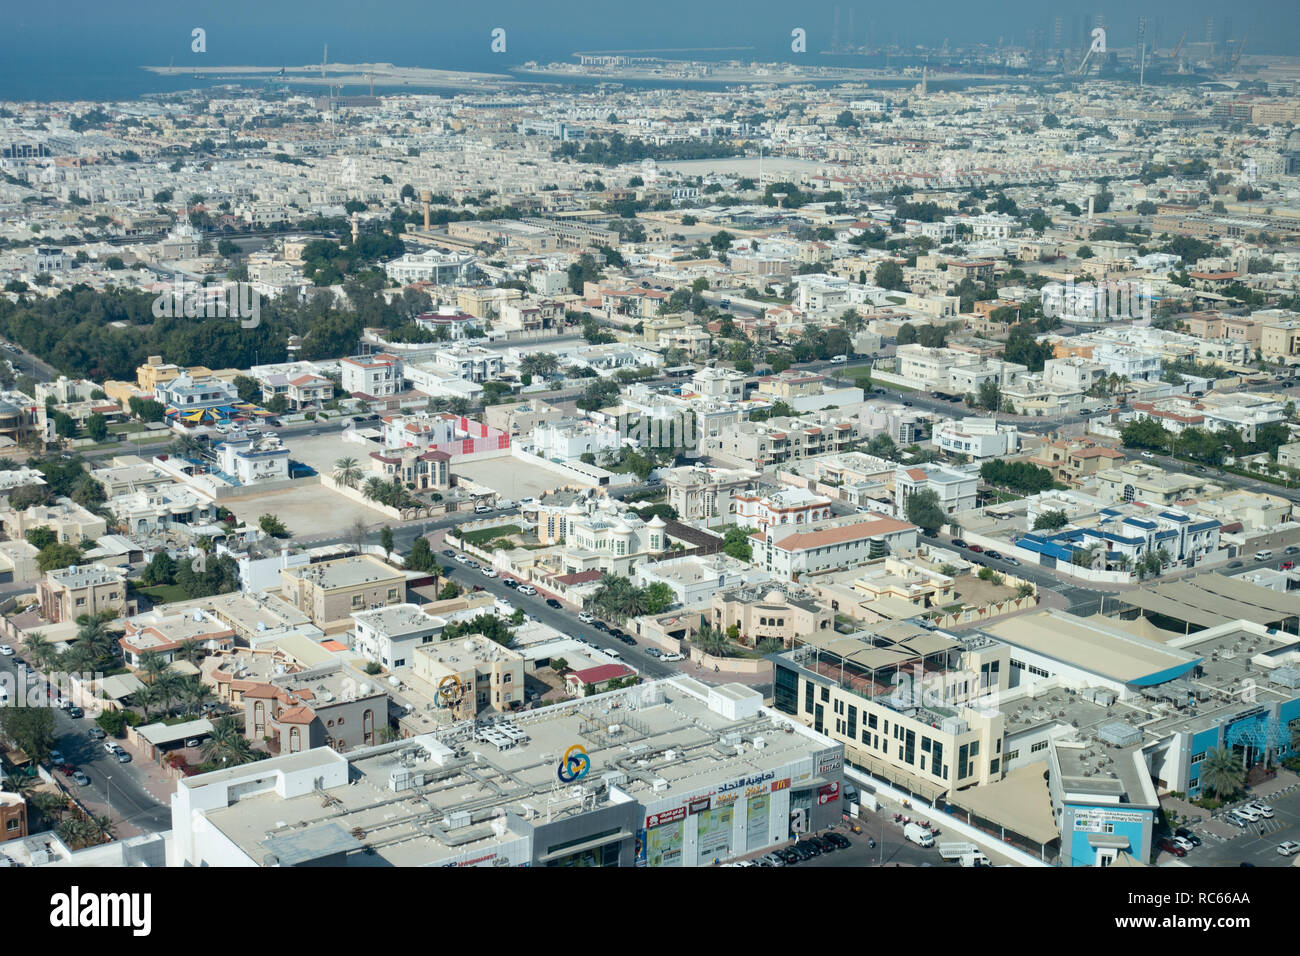 Elevated view over old city of Satwa in Dubai, united Arab Emirates Stock Photo